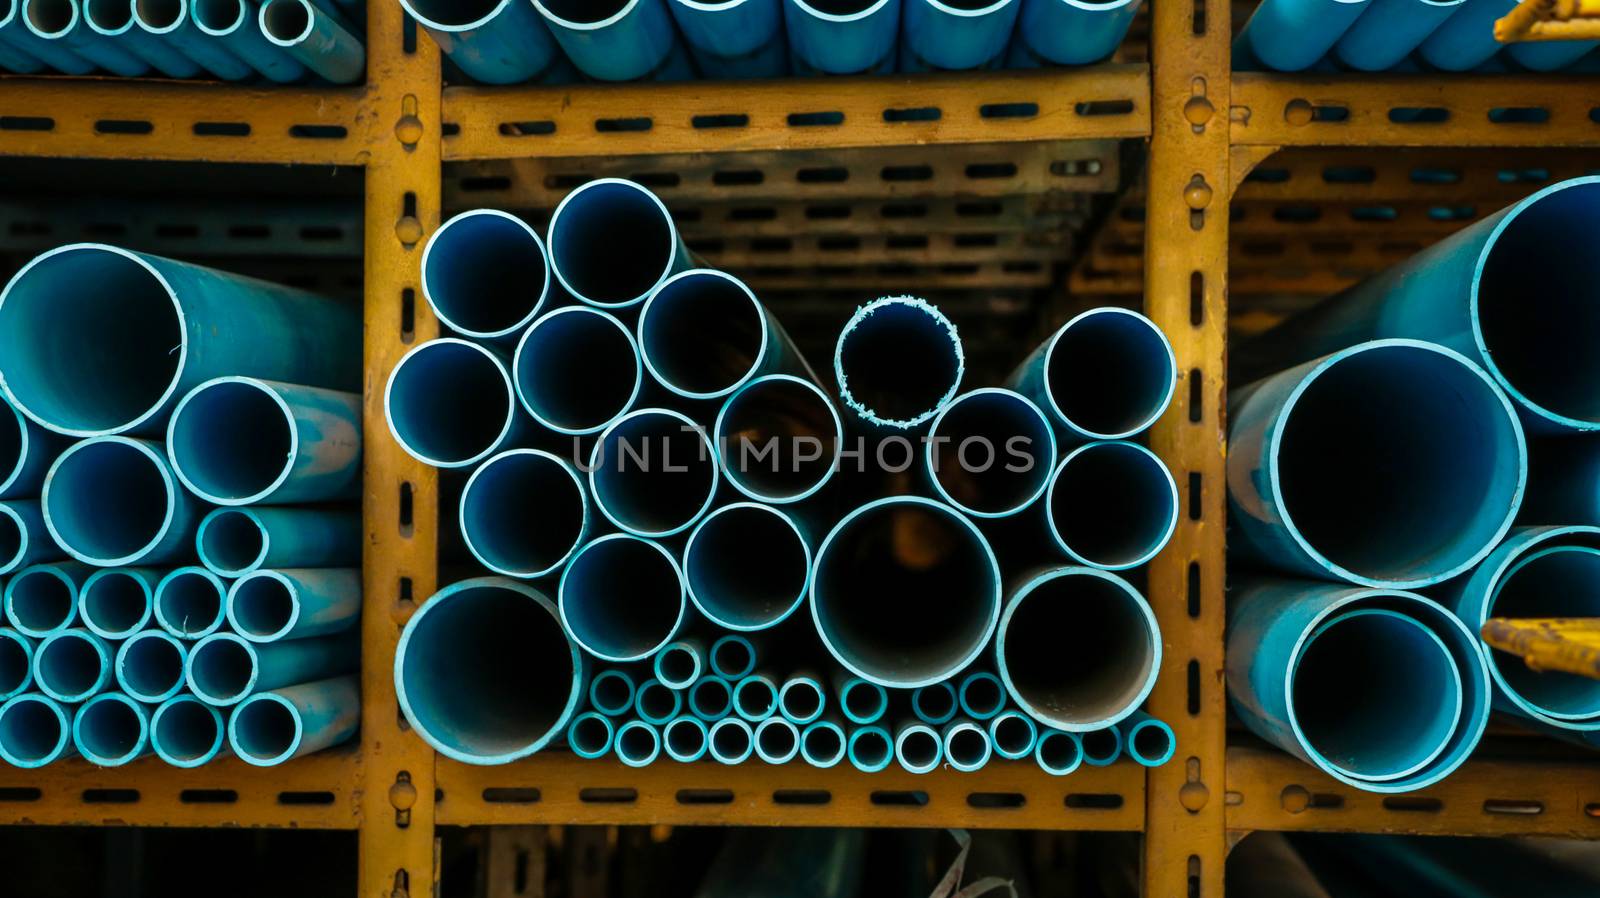 Different Sizes of Blue Water Pipes on Yellow Metal Rack. Eye Level View.